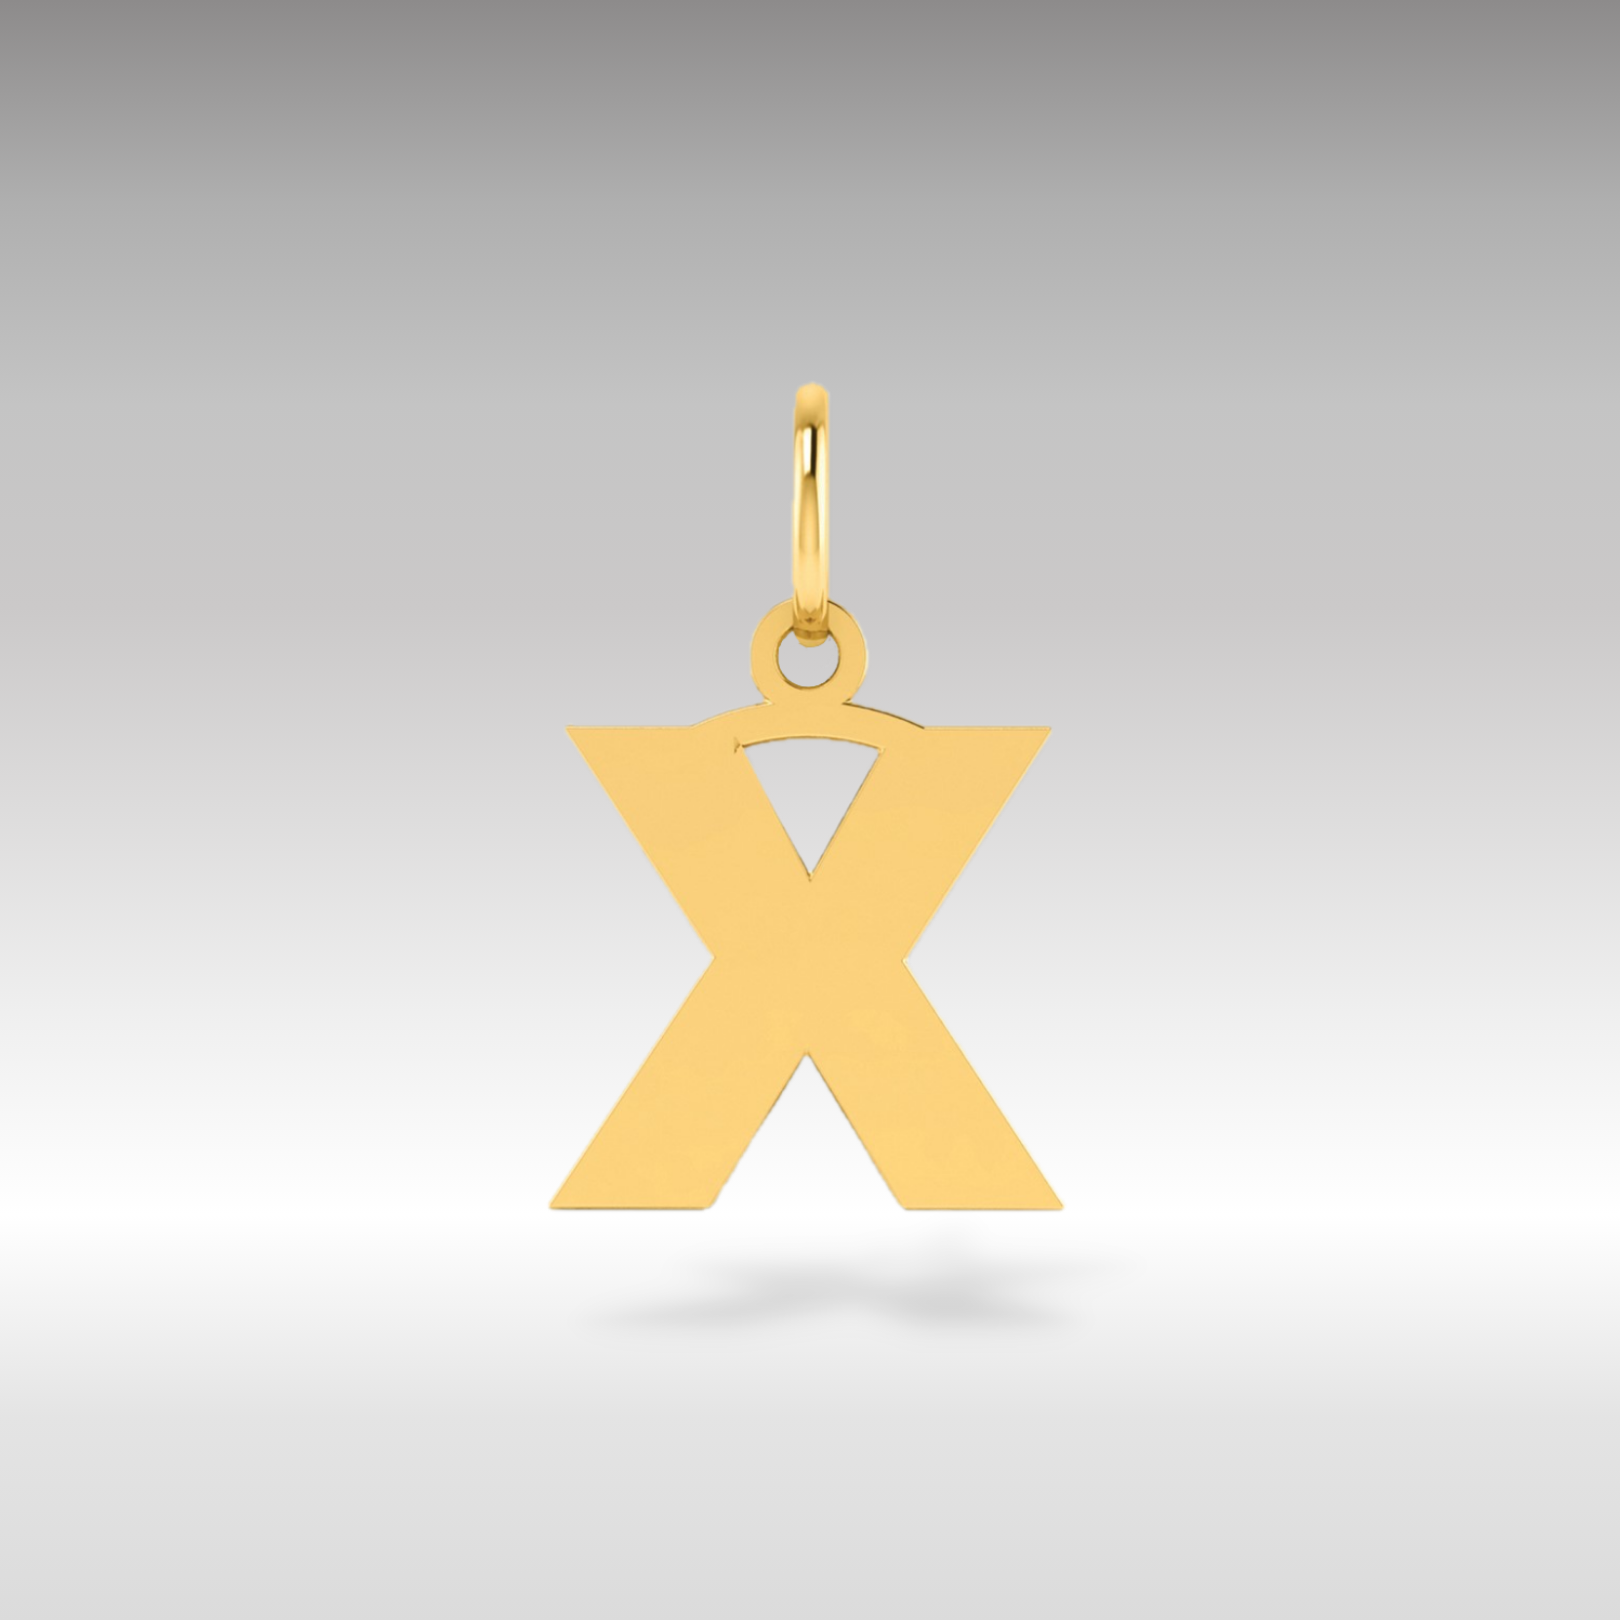 14K Gold Block Letter "X" Initial Pendant - Charlie & Co. Jewelry